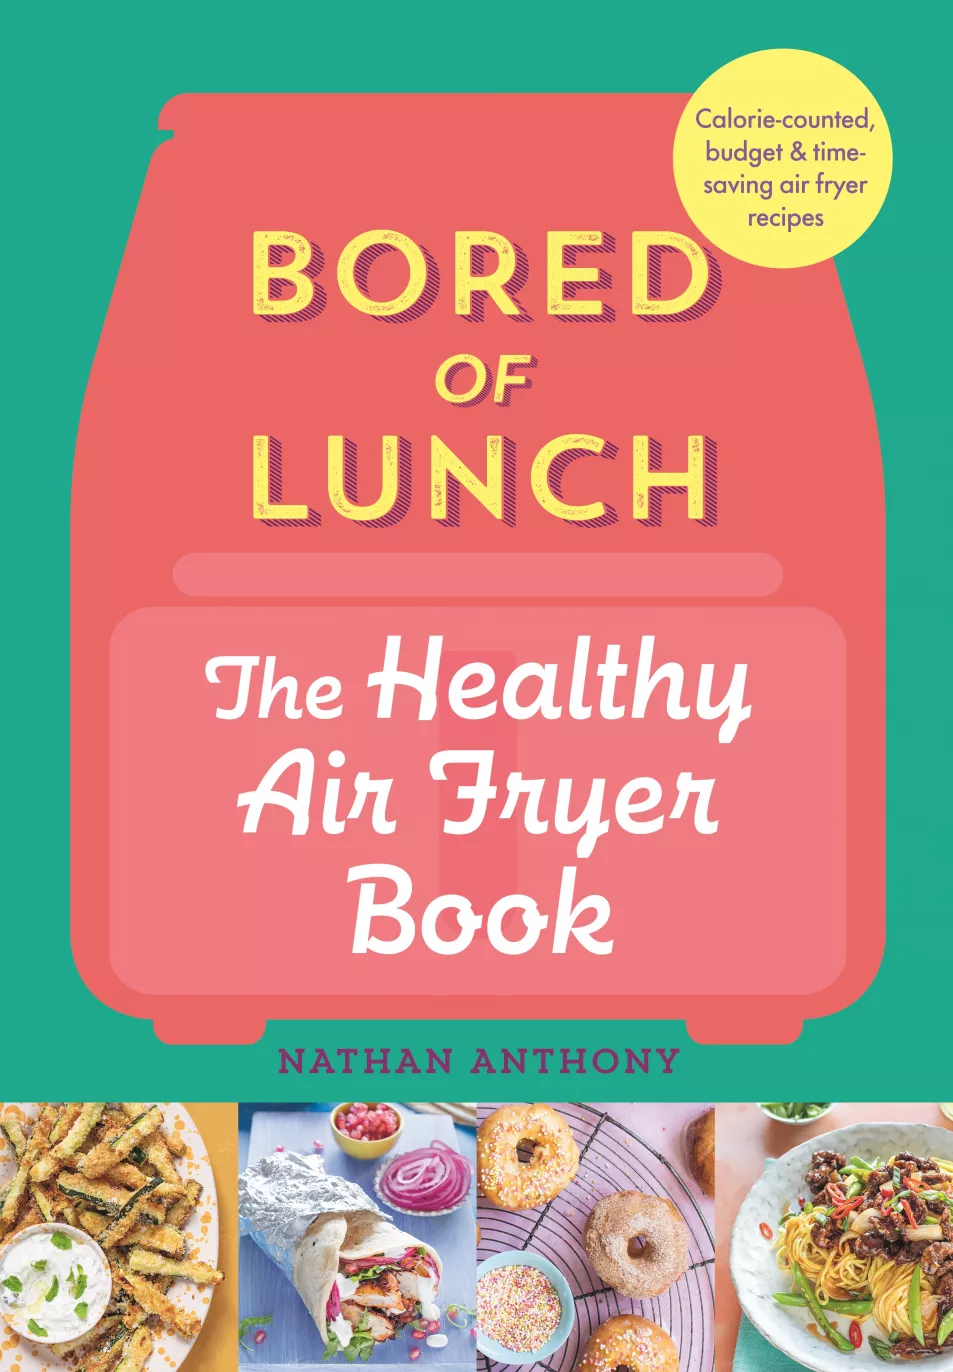 Bored Of Lunch: The Healthy Air Fryer Book by Nathan Anthony